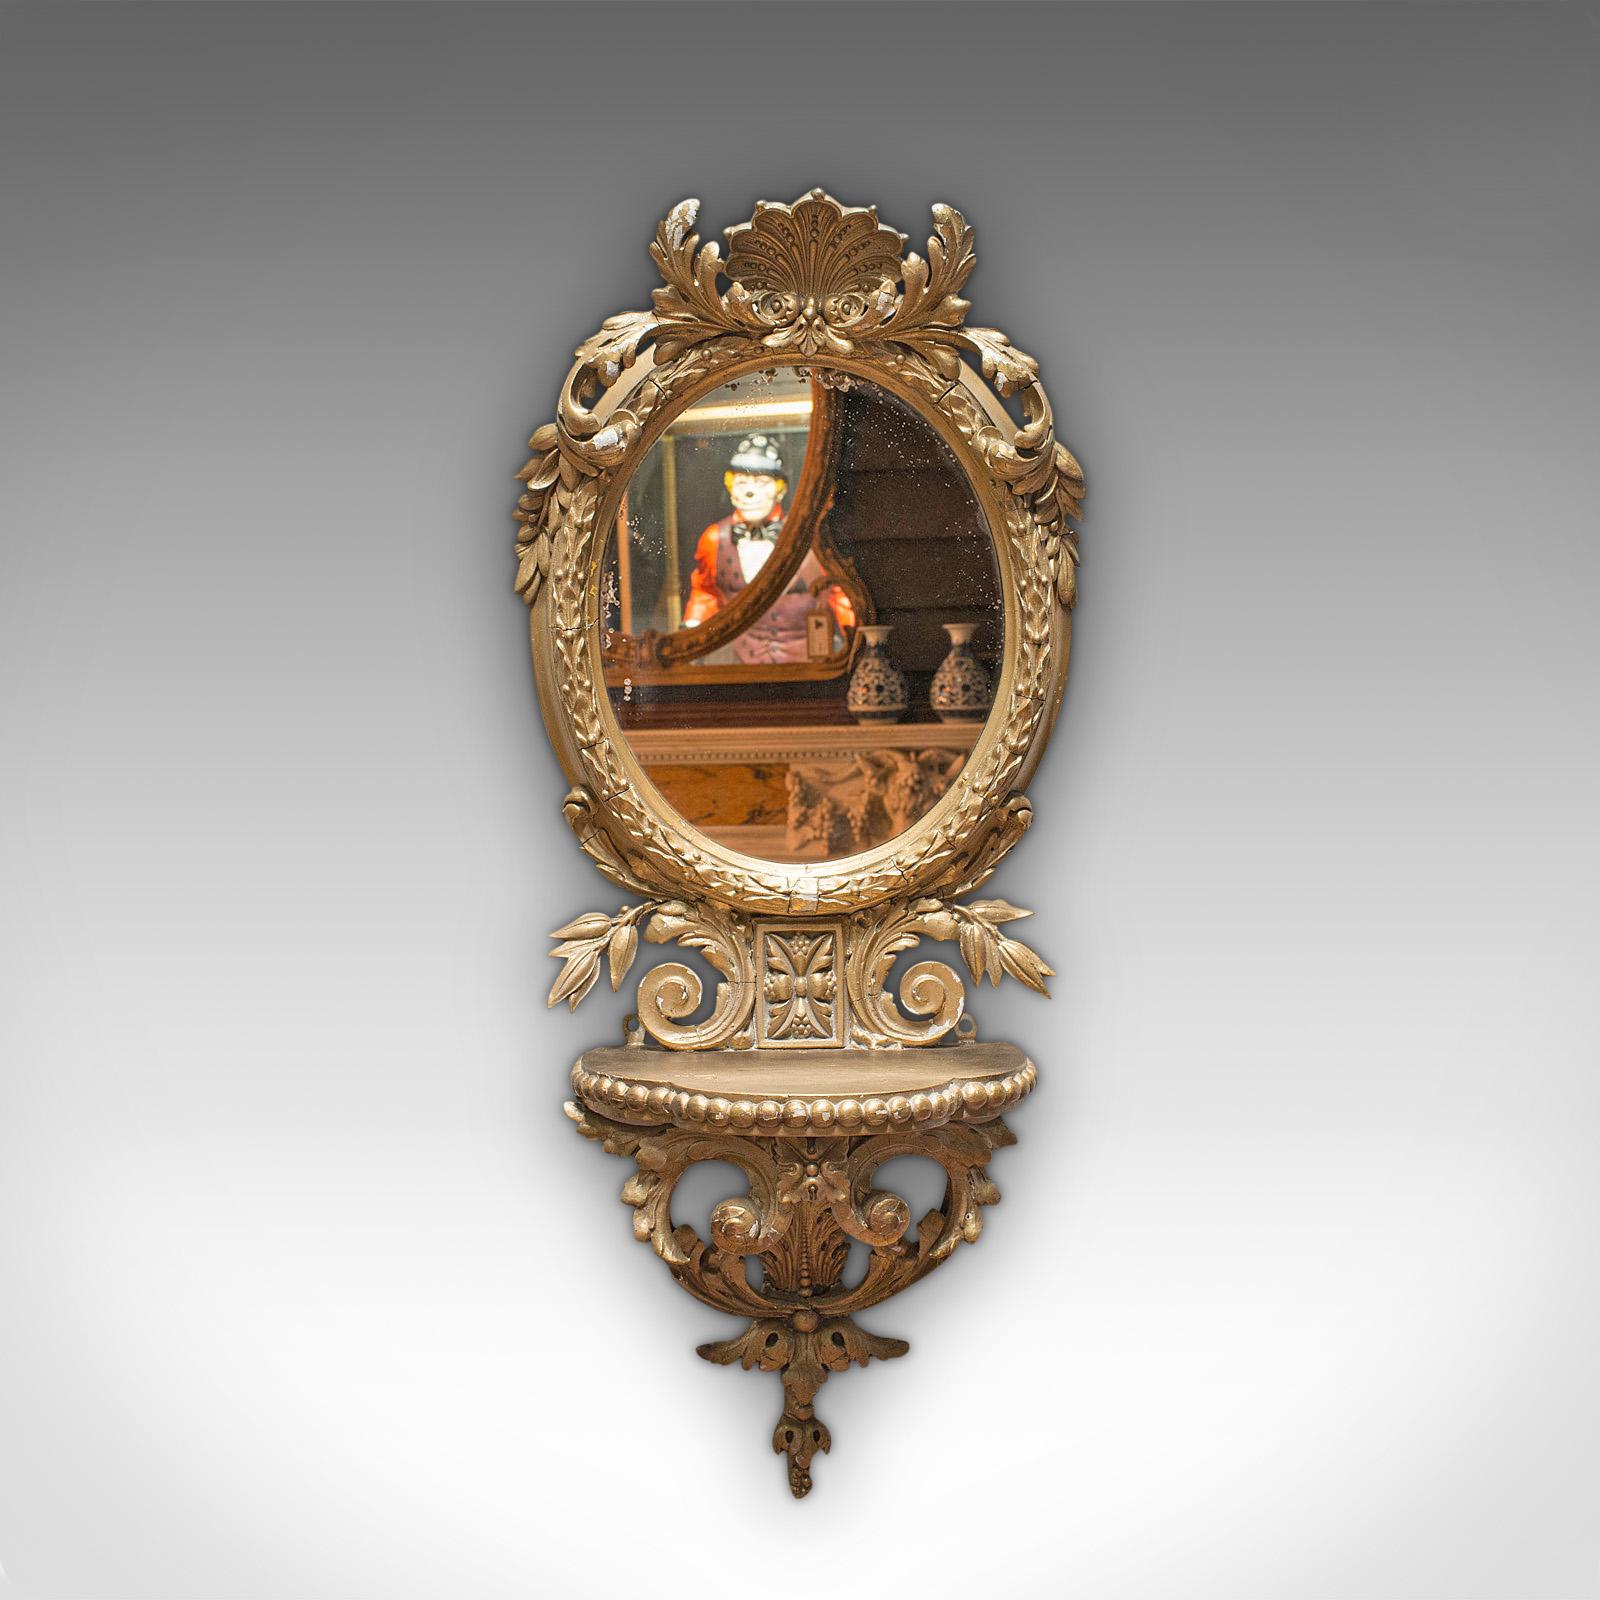 This is an antique wall mirror. A French, gilt gesso oval mirror with ornate frame, dating to the early Victorian period, circa 1850.

Superb detail and appealing hues
Displaying a desirable aged patina
Gilt gesso shows wear commensurate with